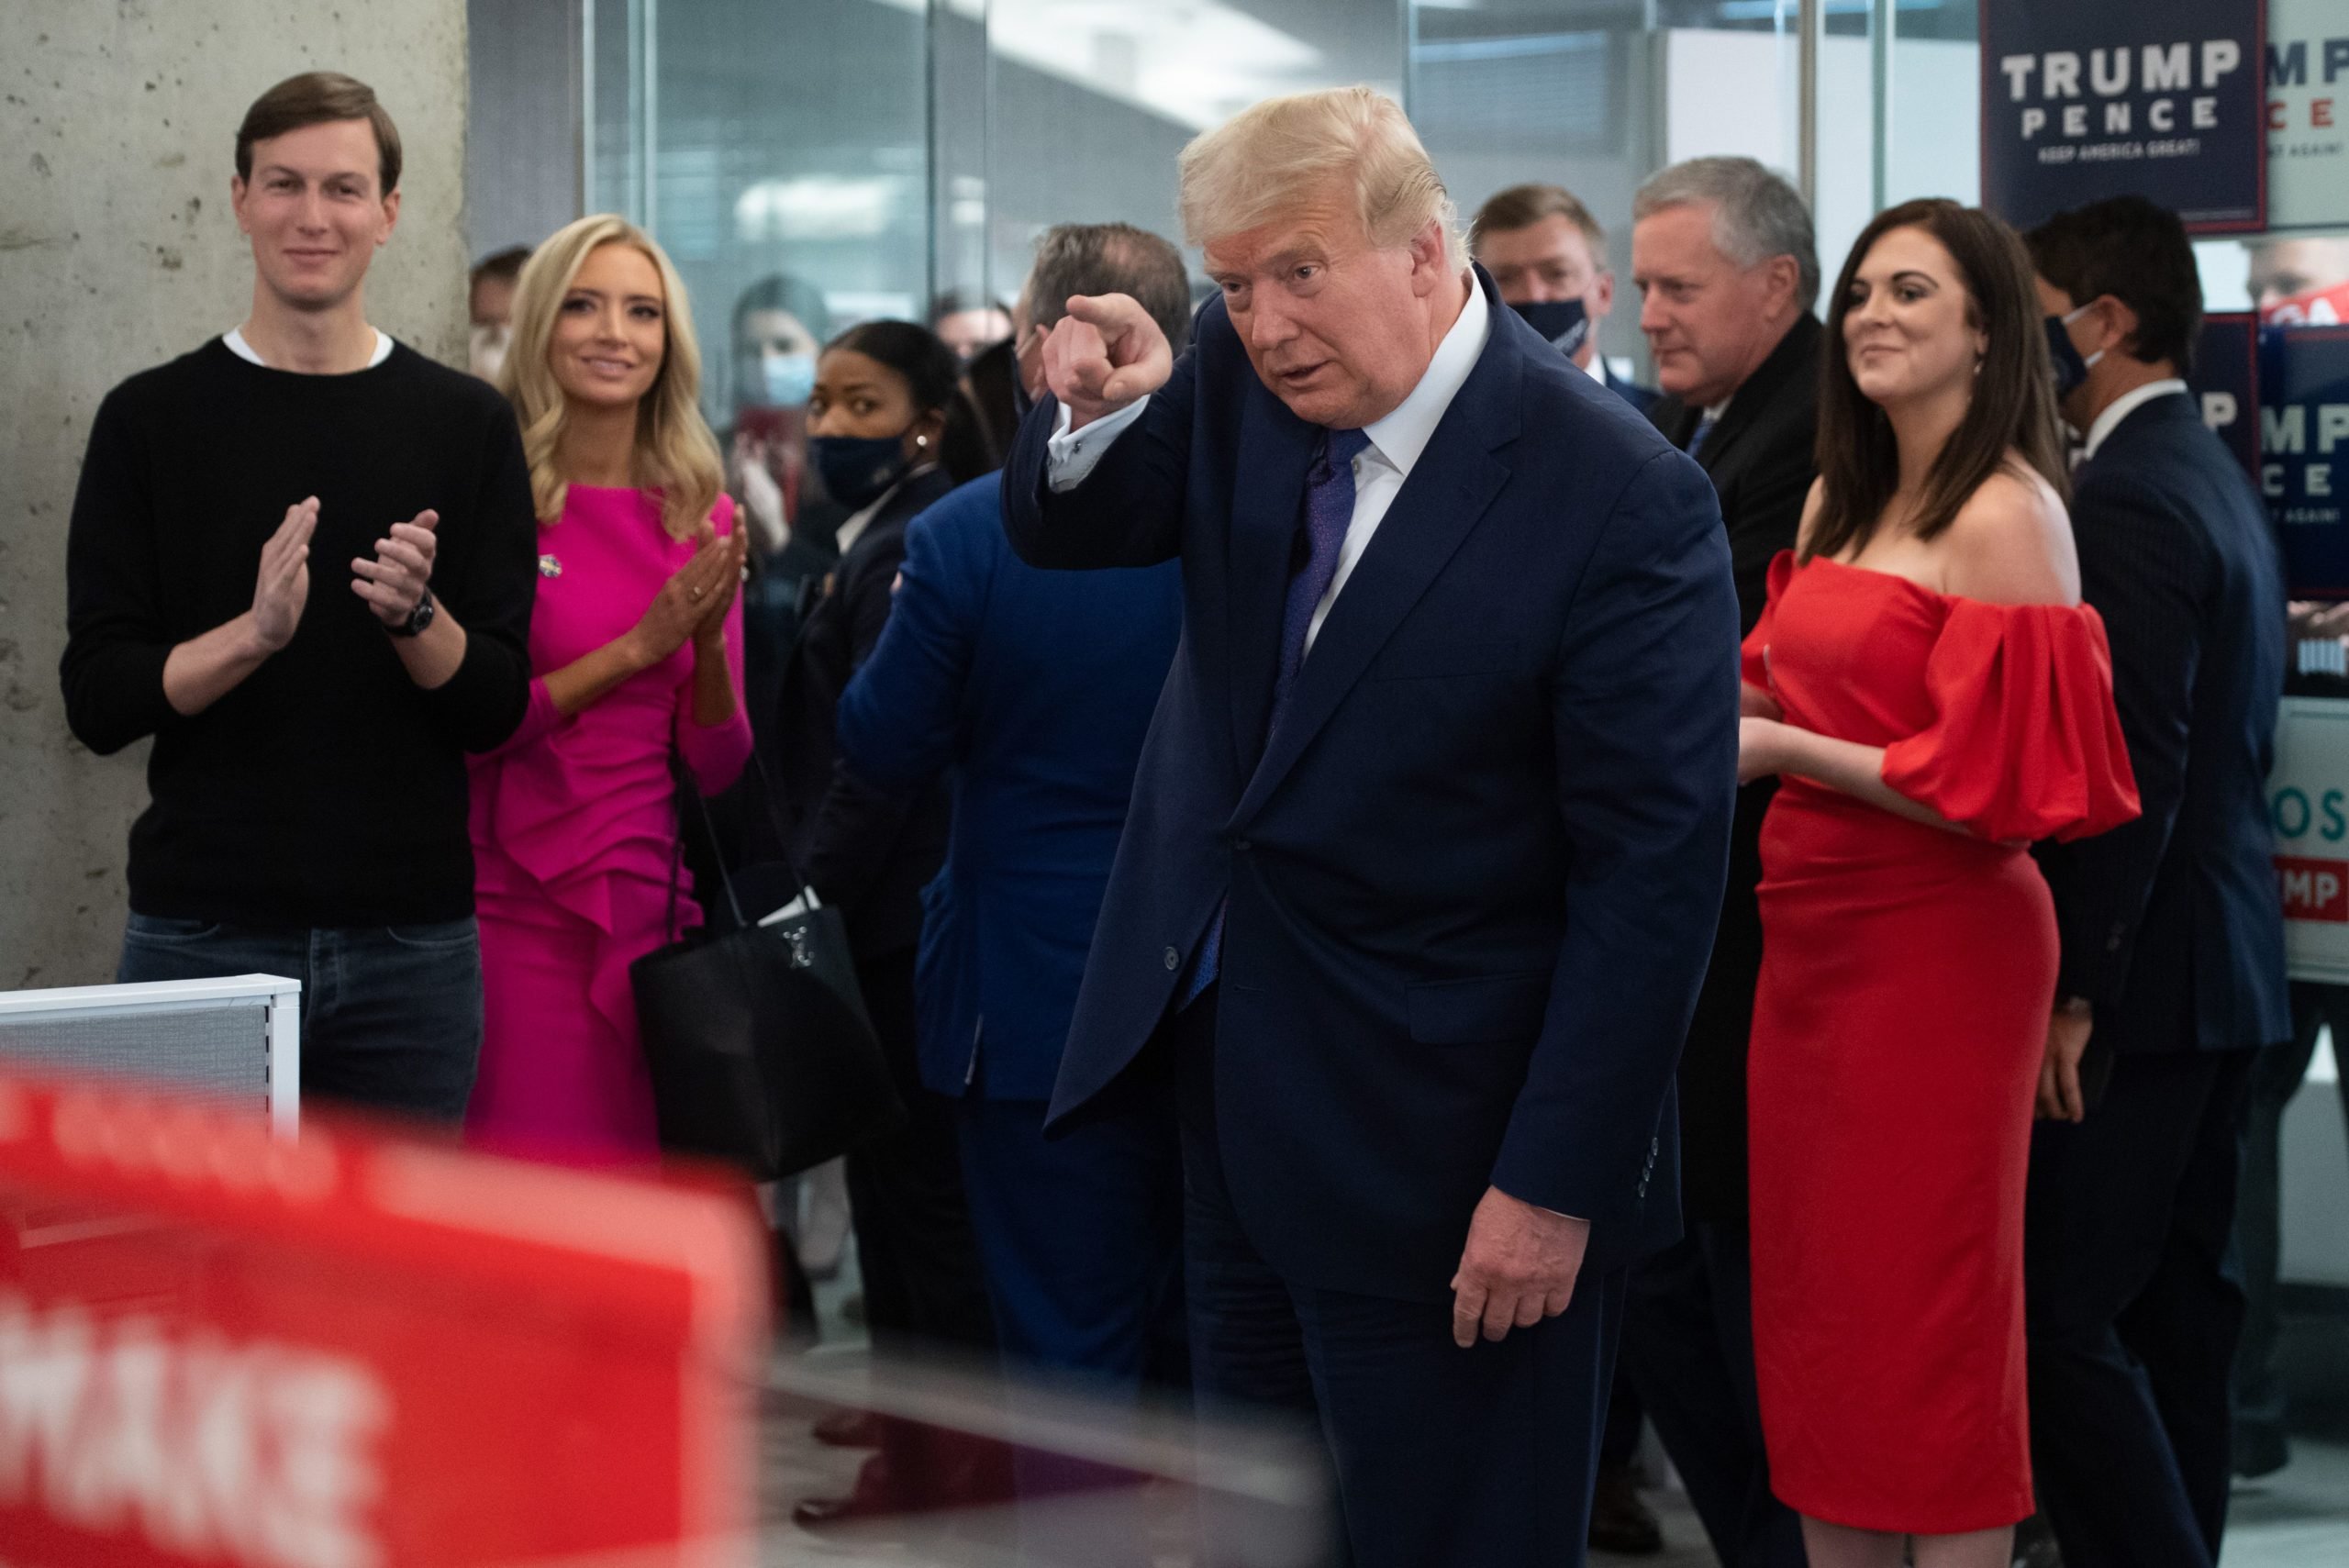 US President Donald Trump points as he visits his campaign headquarters in Arlington, Virginia, November 3, 2020. - A bitterly divided America was going to the polls on Tuesday amid the worst pandemic in a century and an economic crisis to decide whether to give President Donald Trump four more years or send Democrat Joe Biden to the White House. A record-breaking number of early votes -- more than 100 million -- have already been cast in an election that has the nation on edge and is being closely watched in capitals around the world. (Photo by SAUL LOEB/AFP via Getty Images)